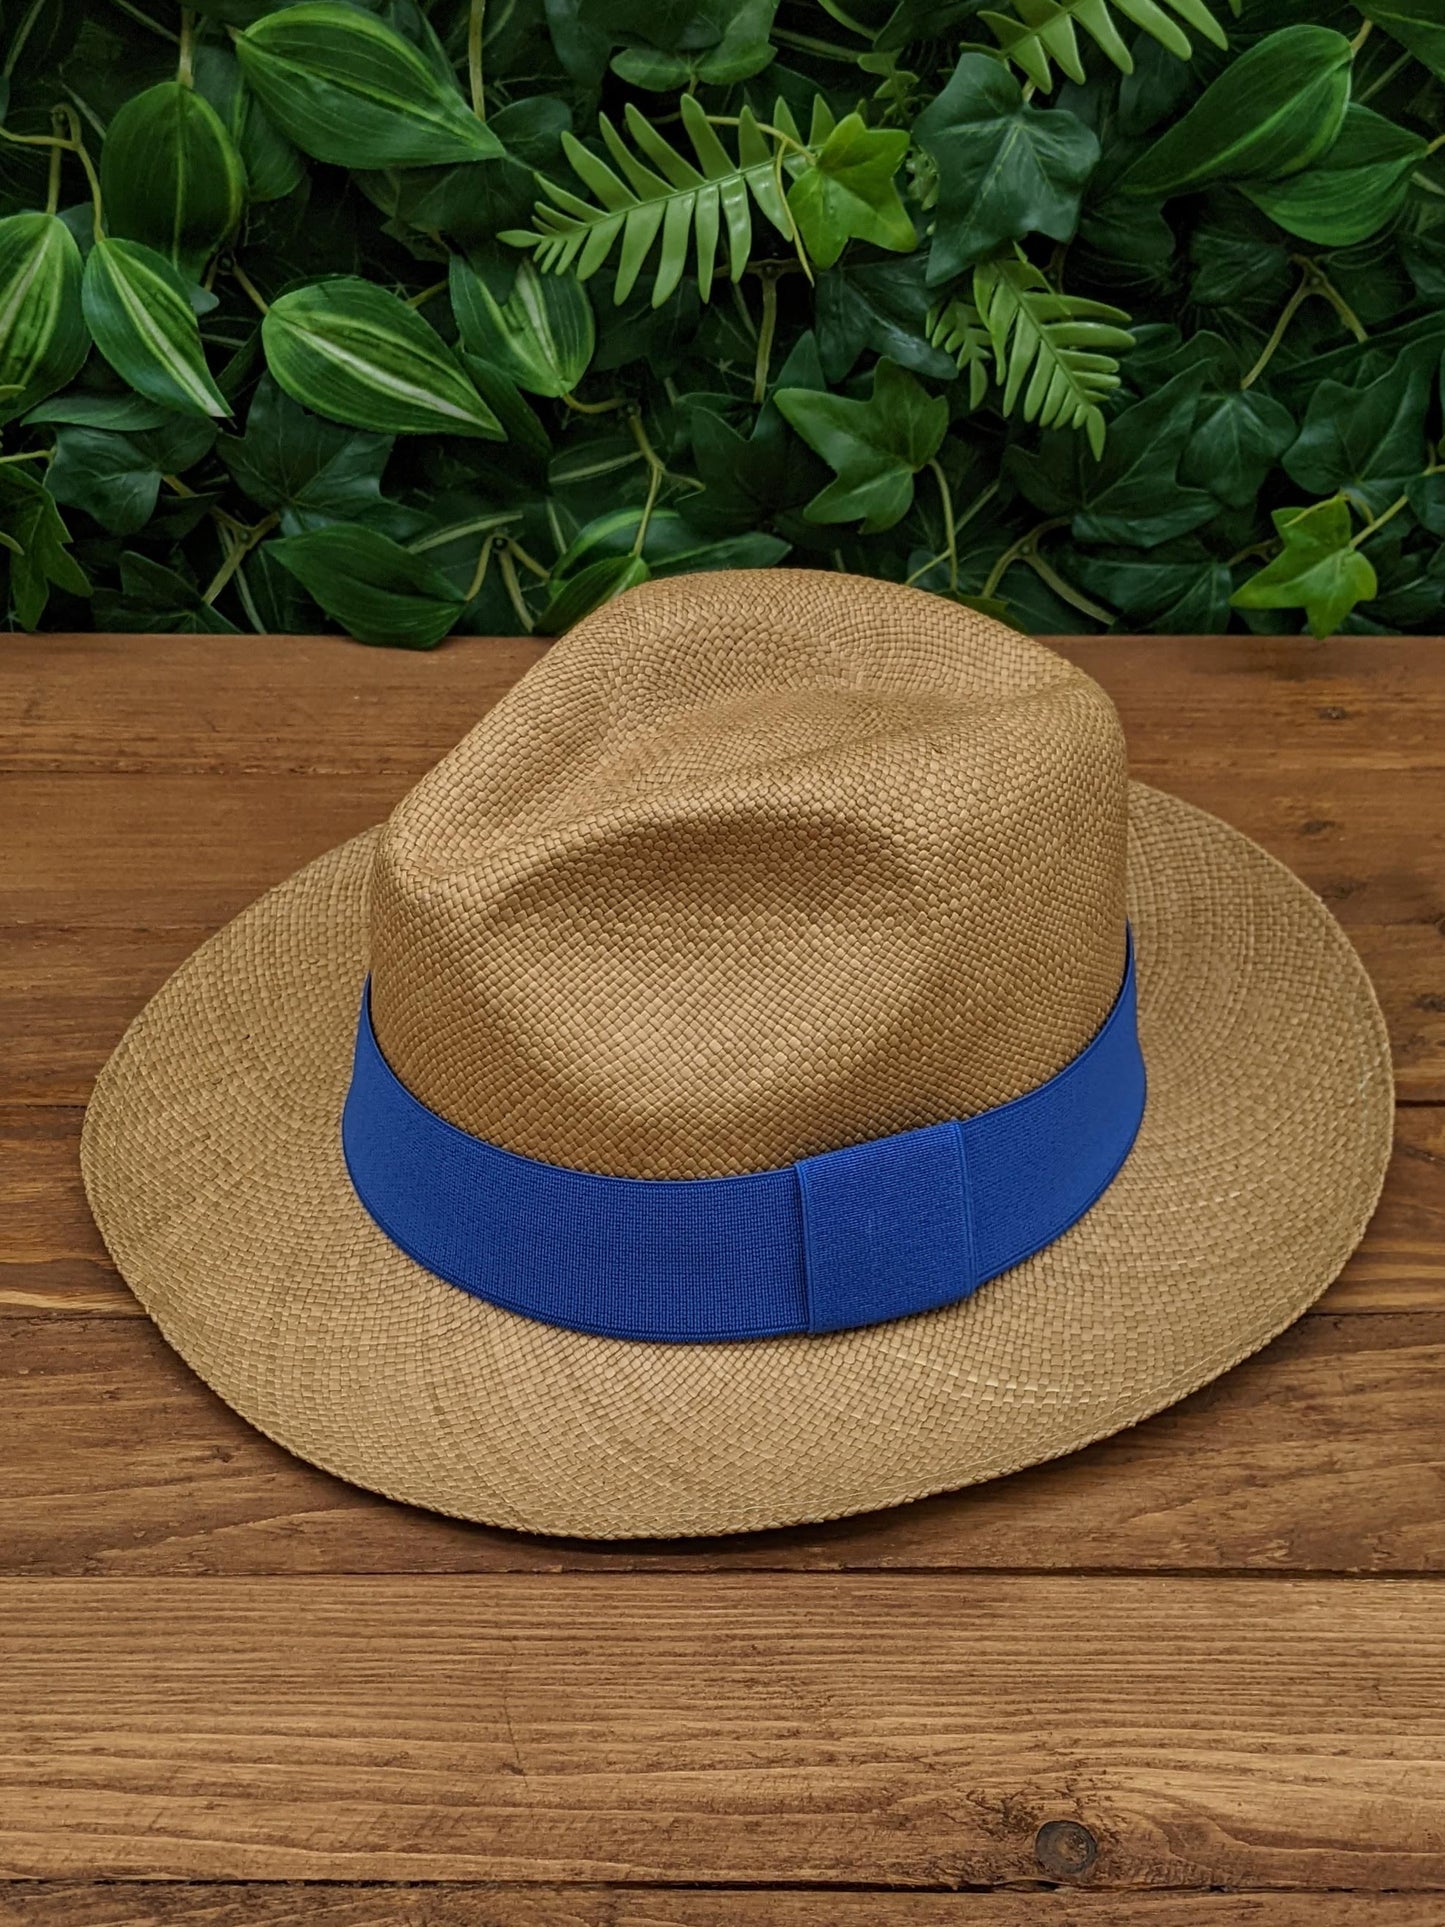 Brown Panama with Cobalt Blue Band